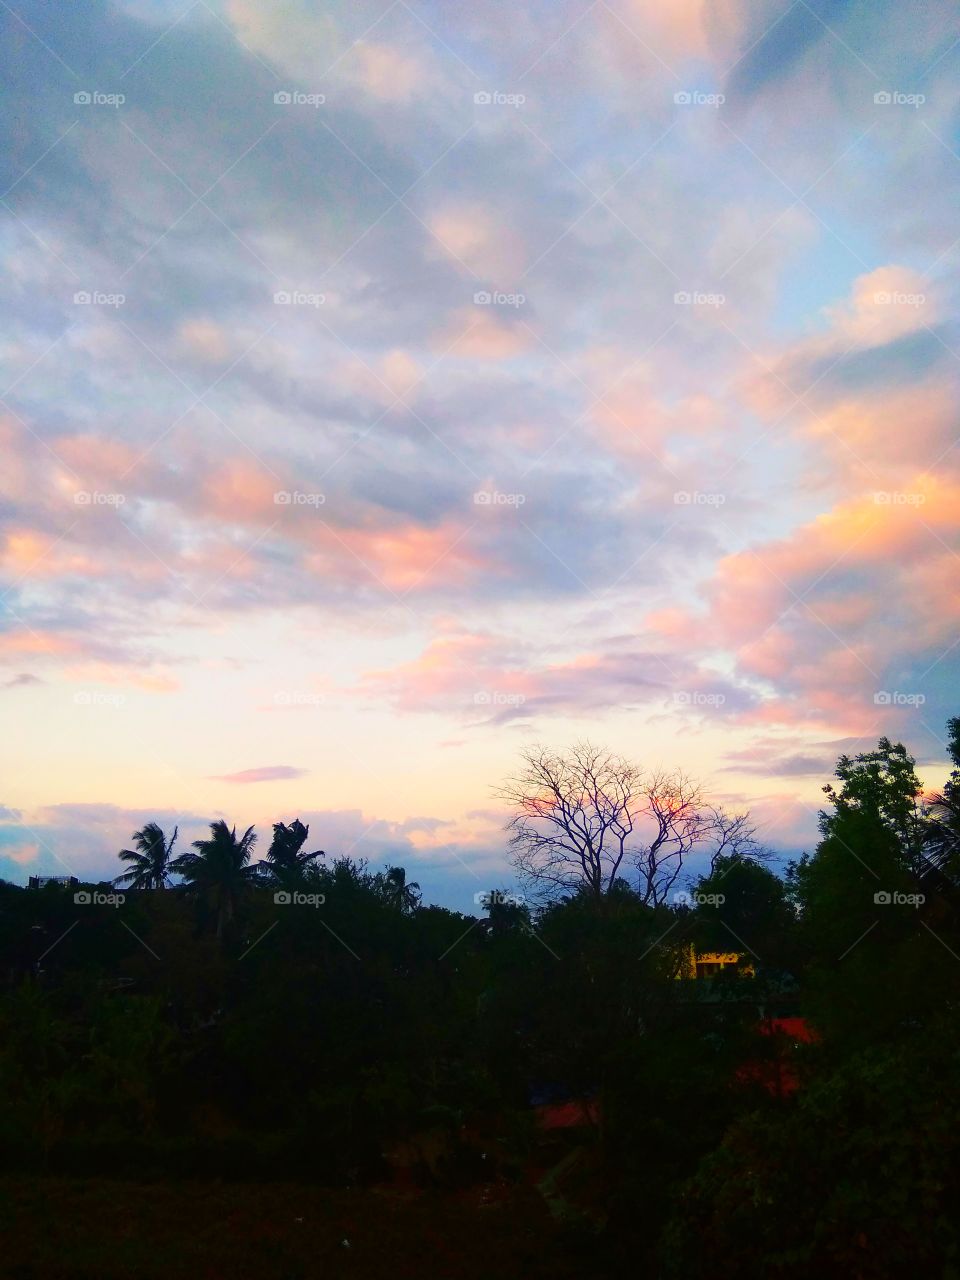 colorful clouds and trees. This is attractive.